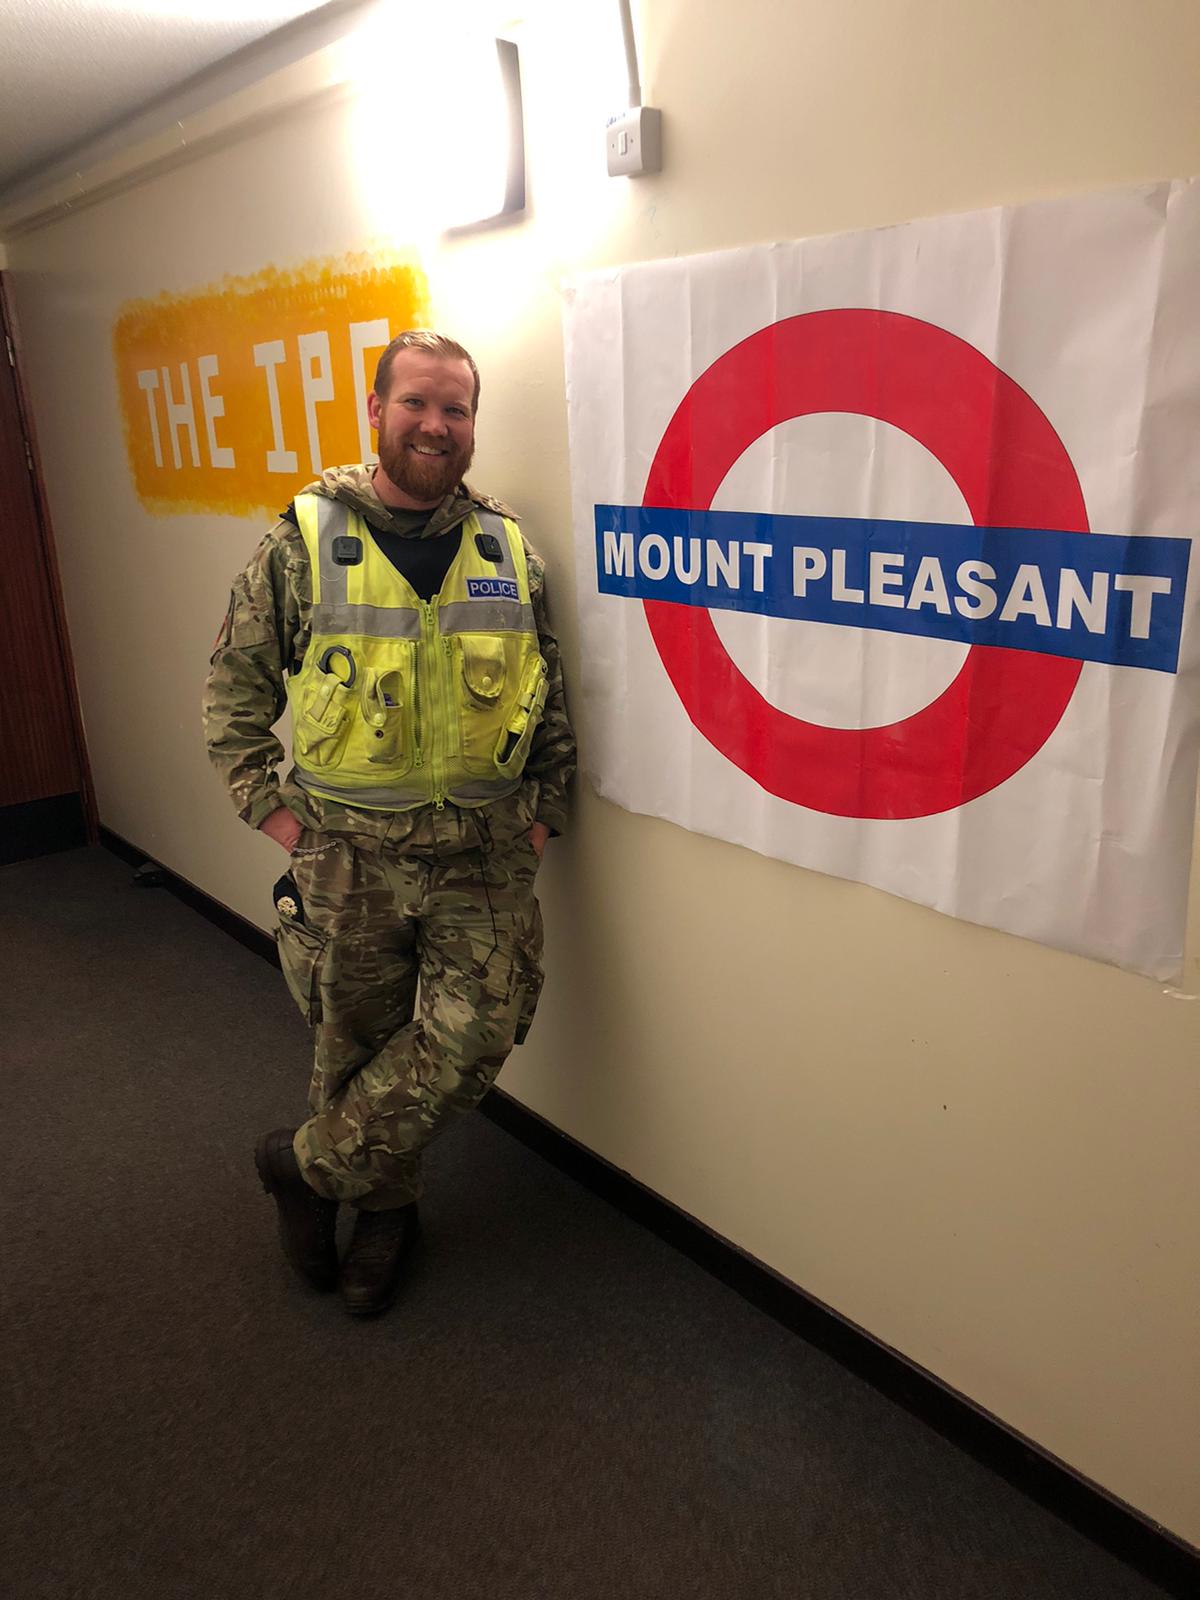 RAF Policeman stands by Mount Pleasant sign.